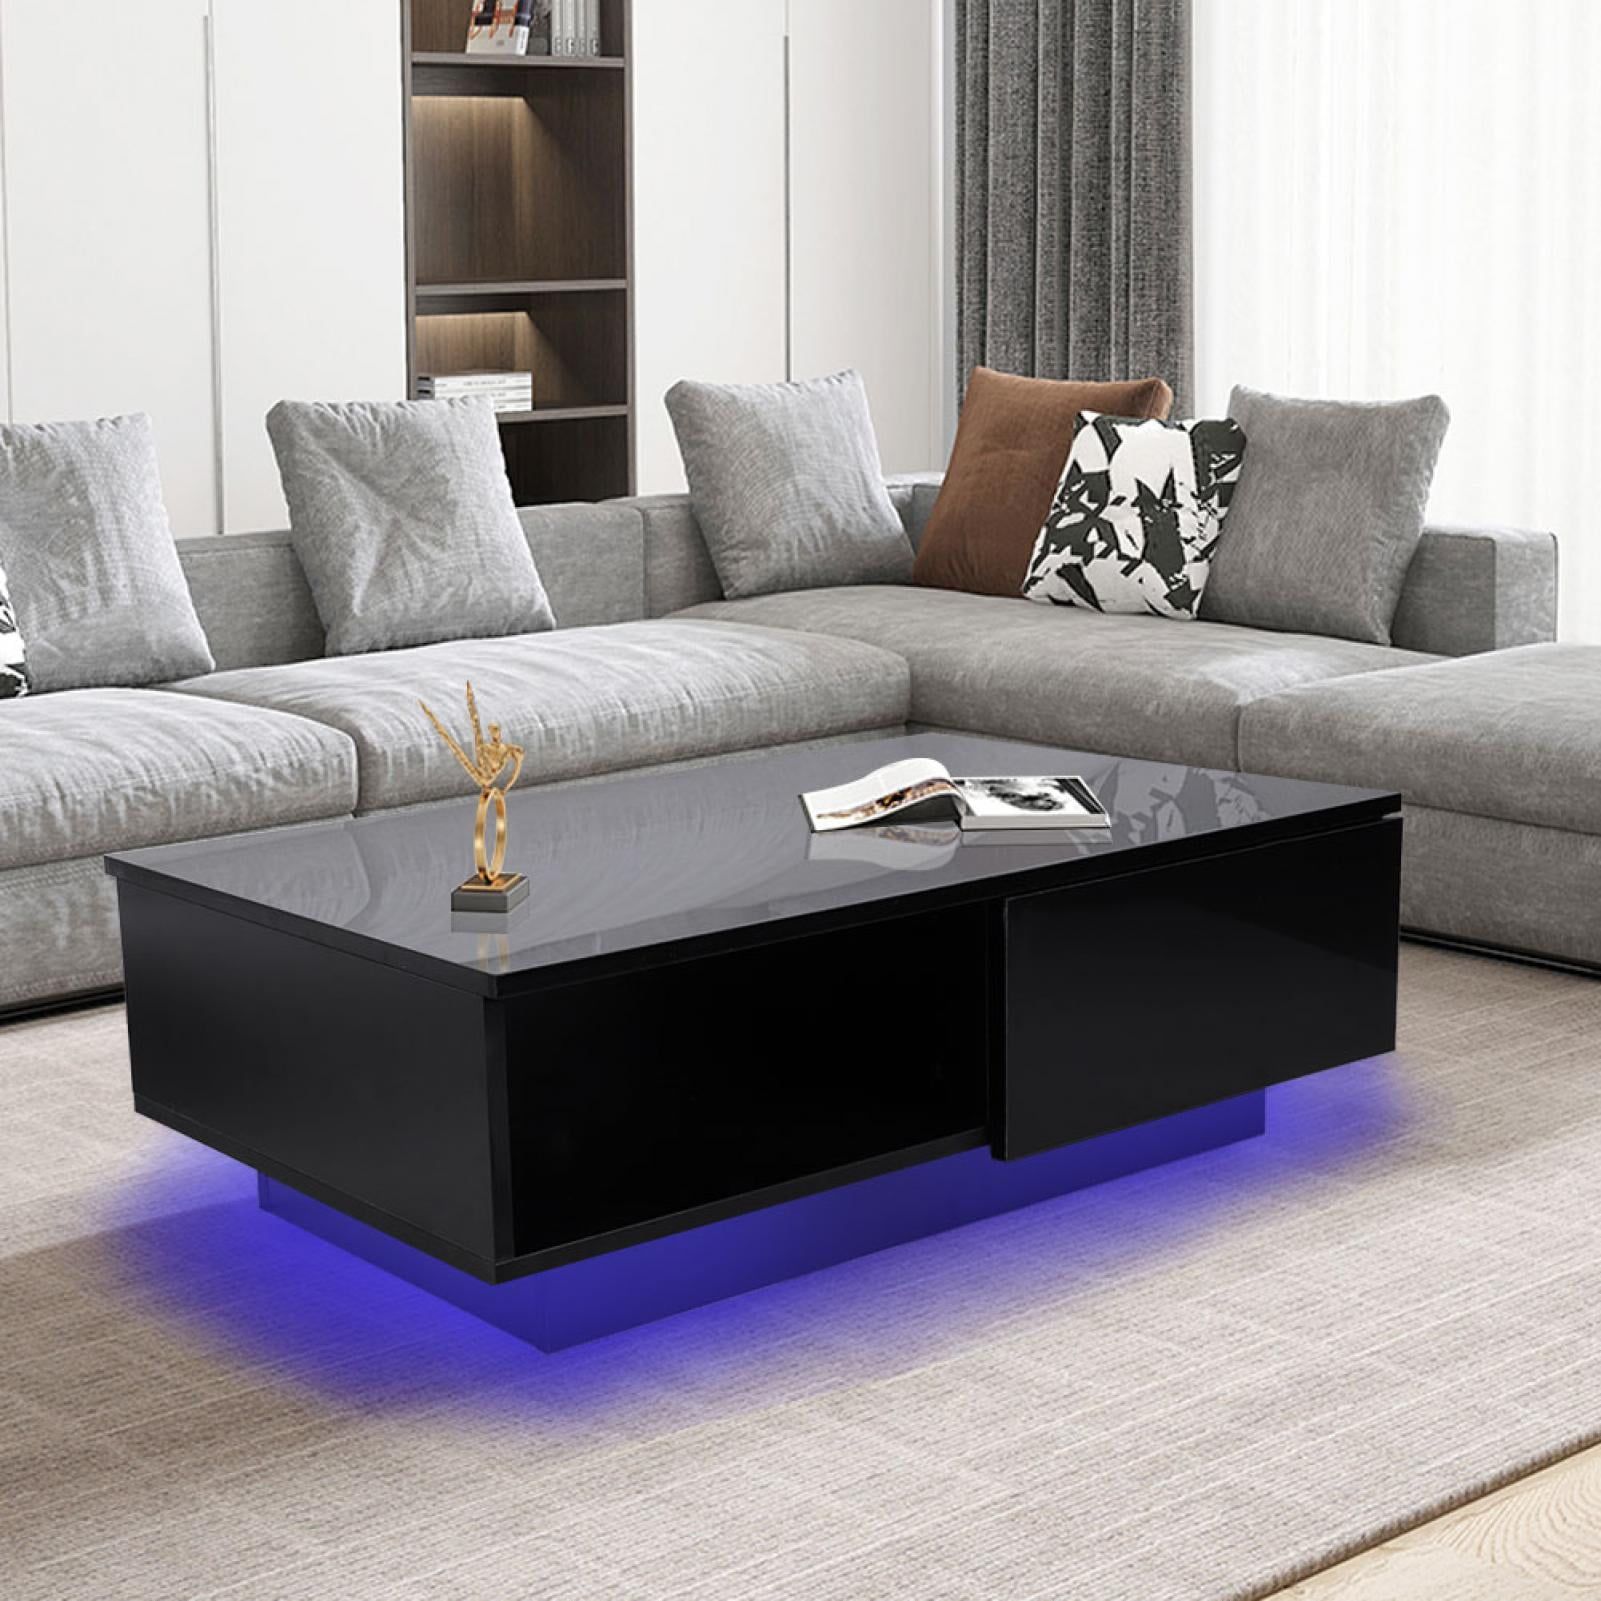 Ebtools Led 37inch High Gloss Coffee Table, Black Lithuania | Ubuy Throughout Coffee Tables With Led Lights (Photo 5 of 15)